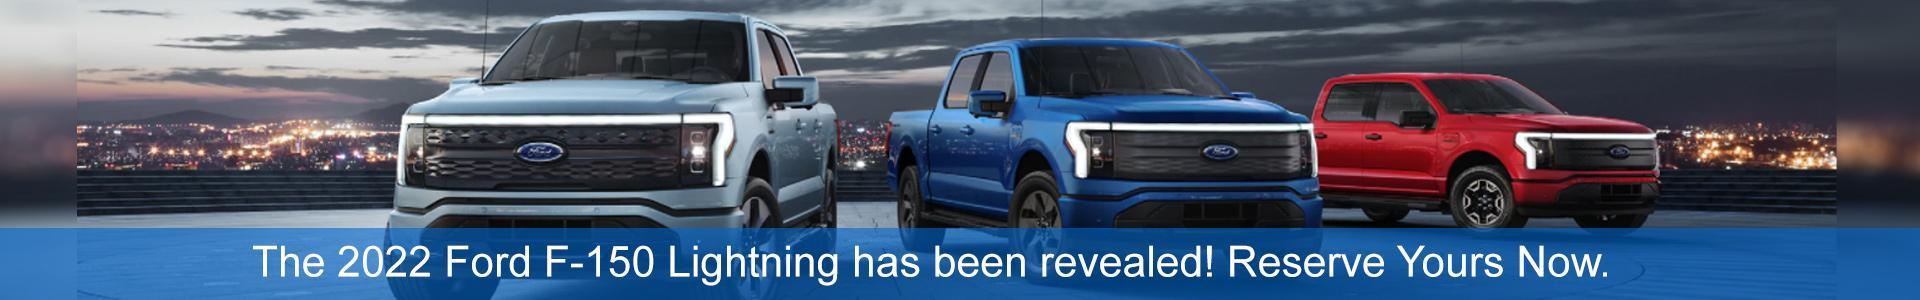 Reserve Your 2022 F-150 Lightning Today!